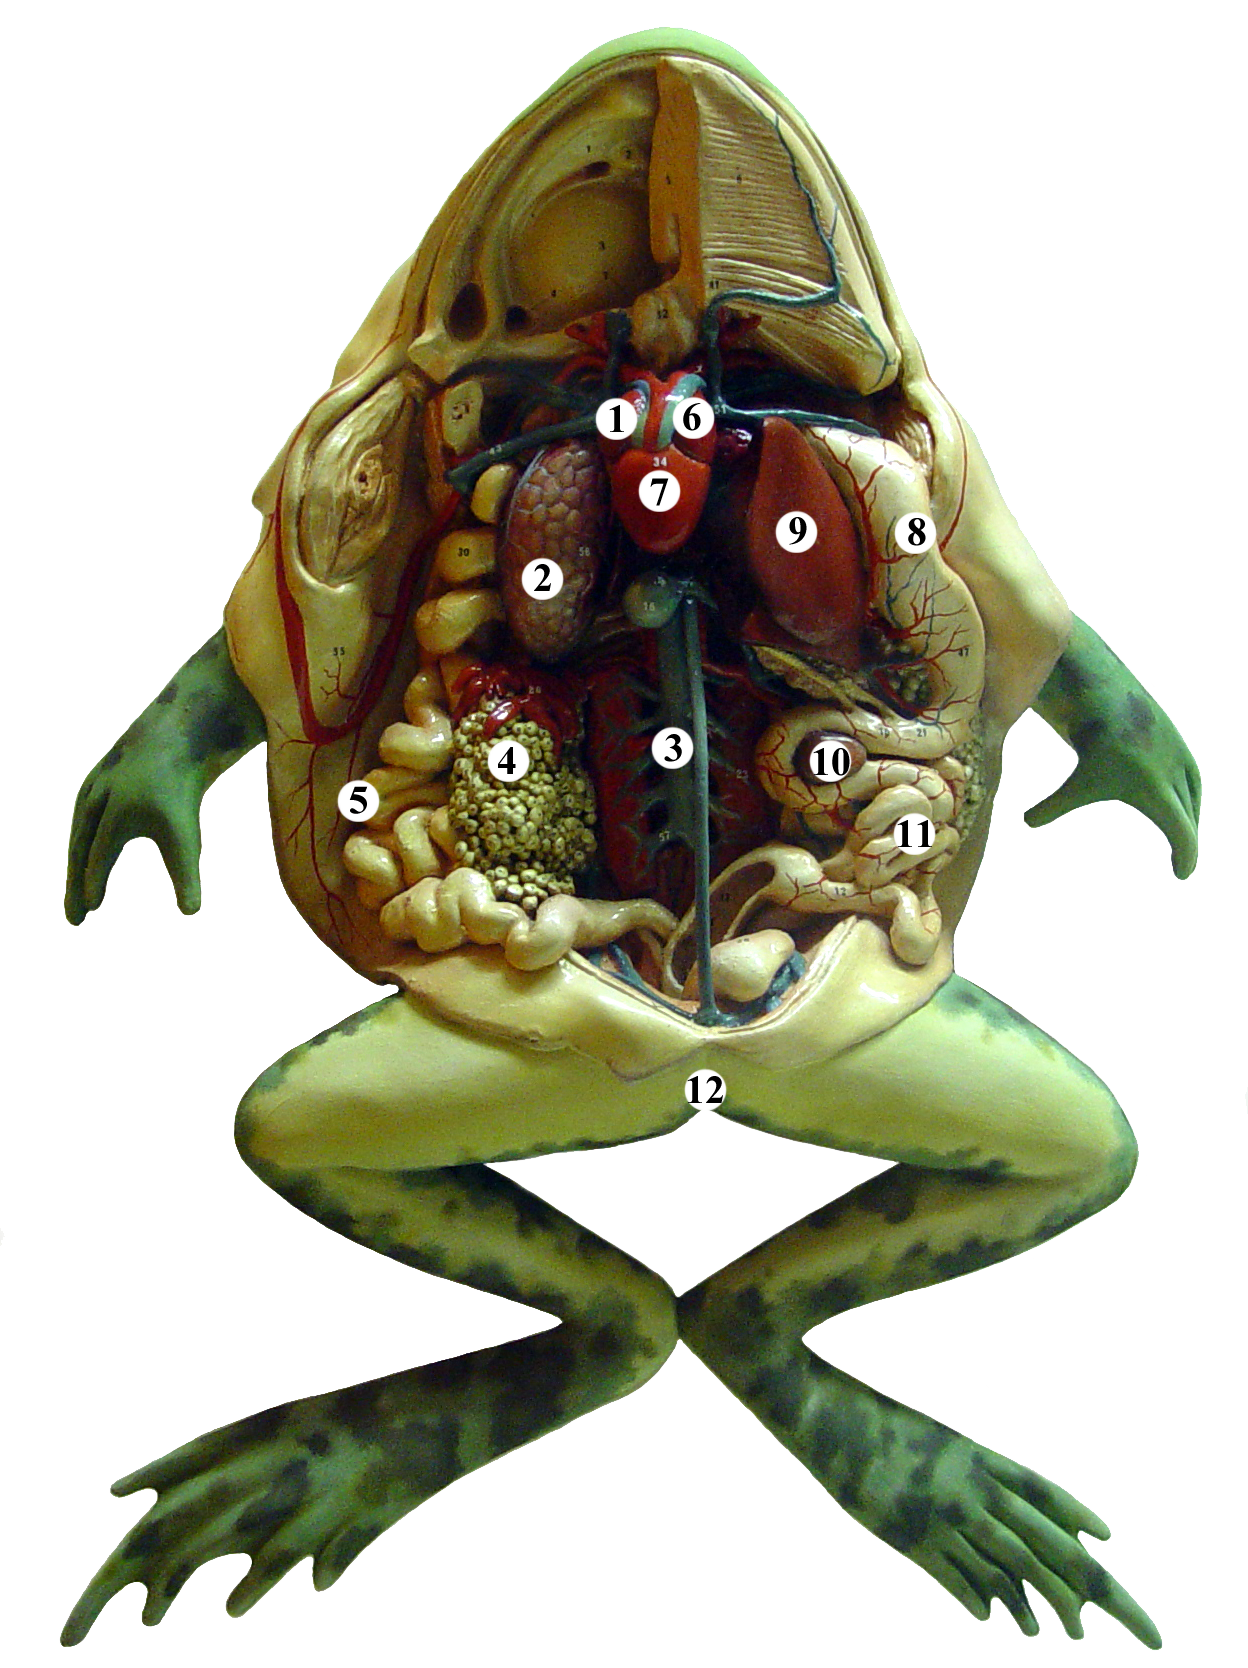 dissect frog